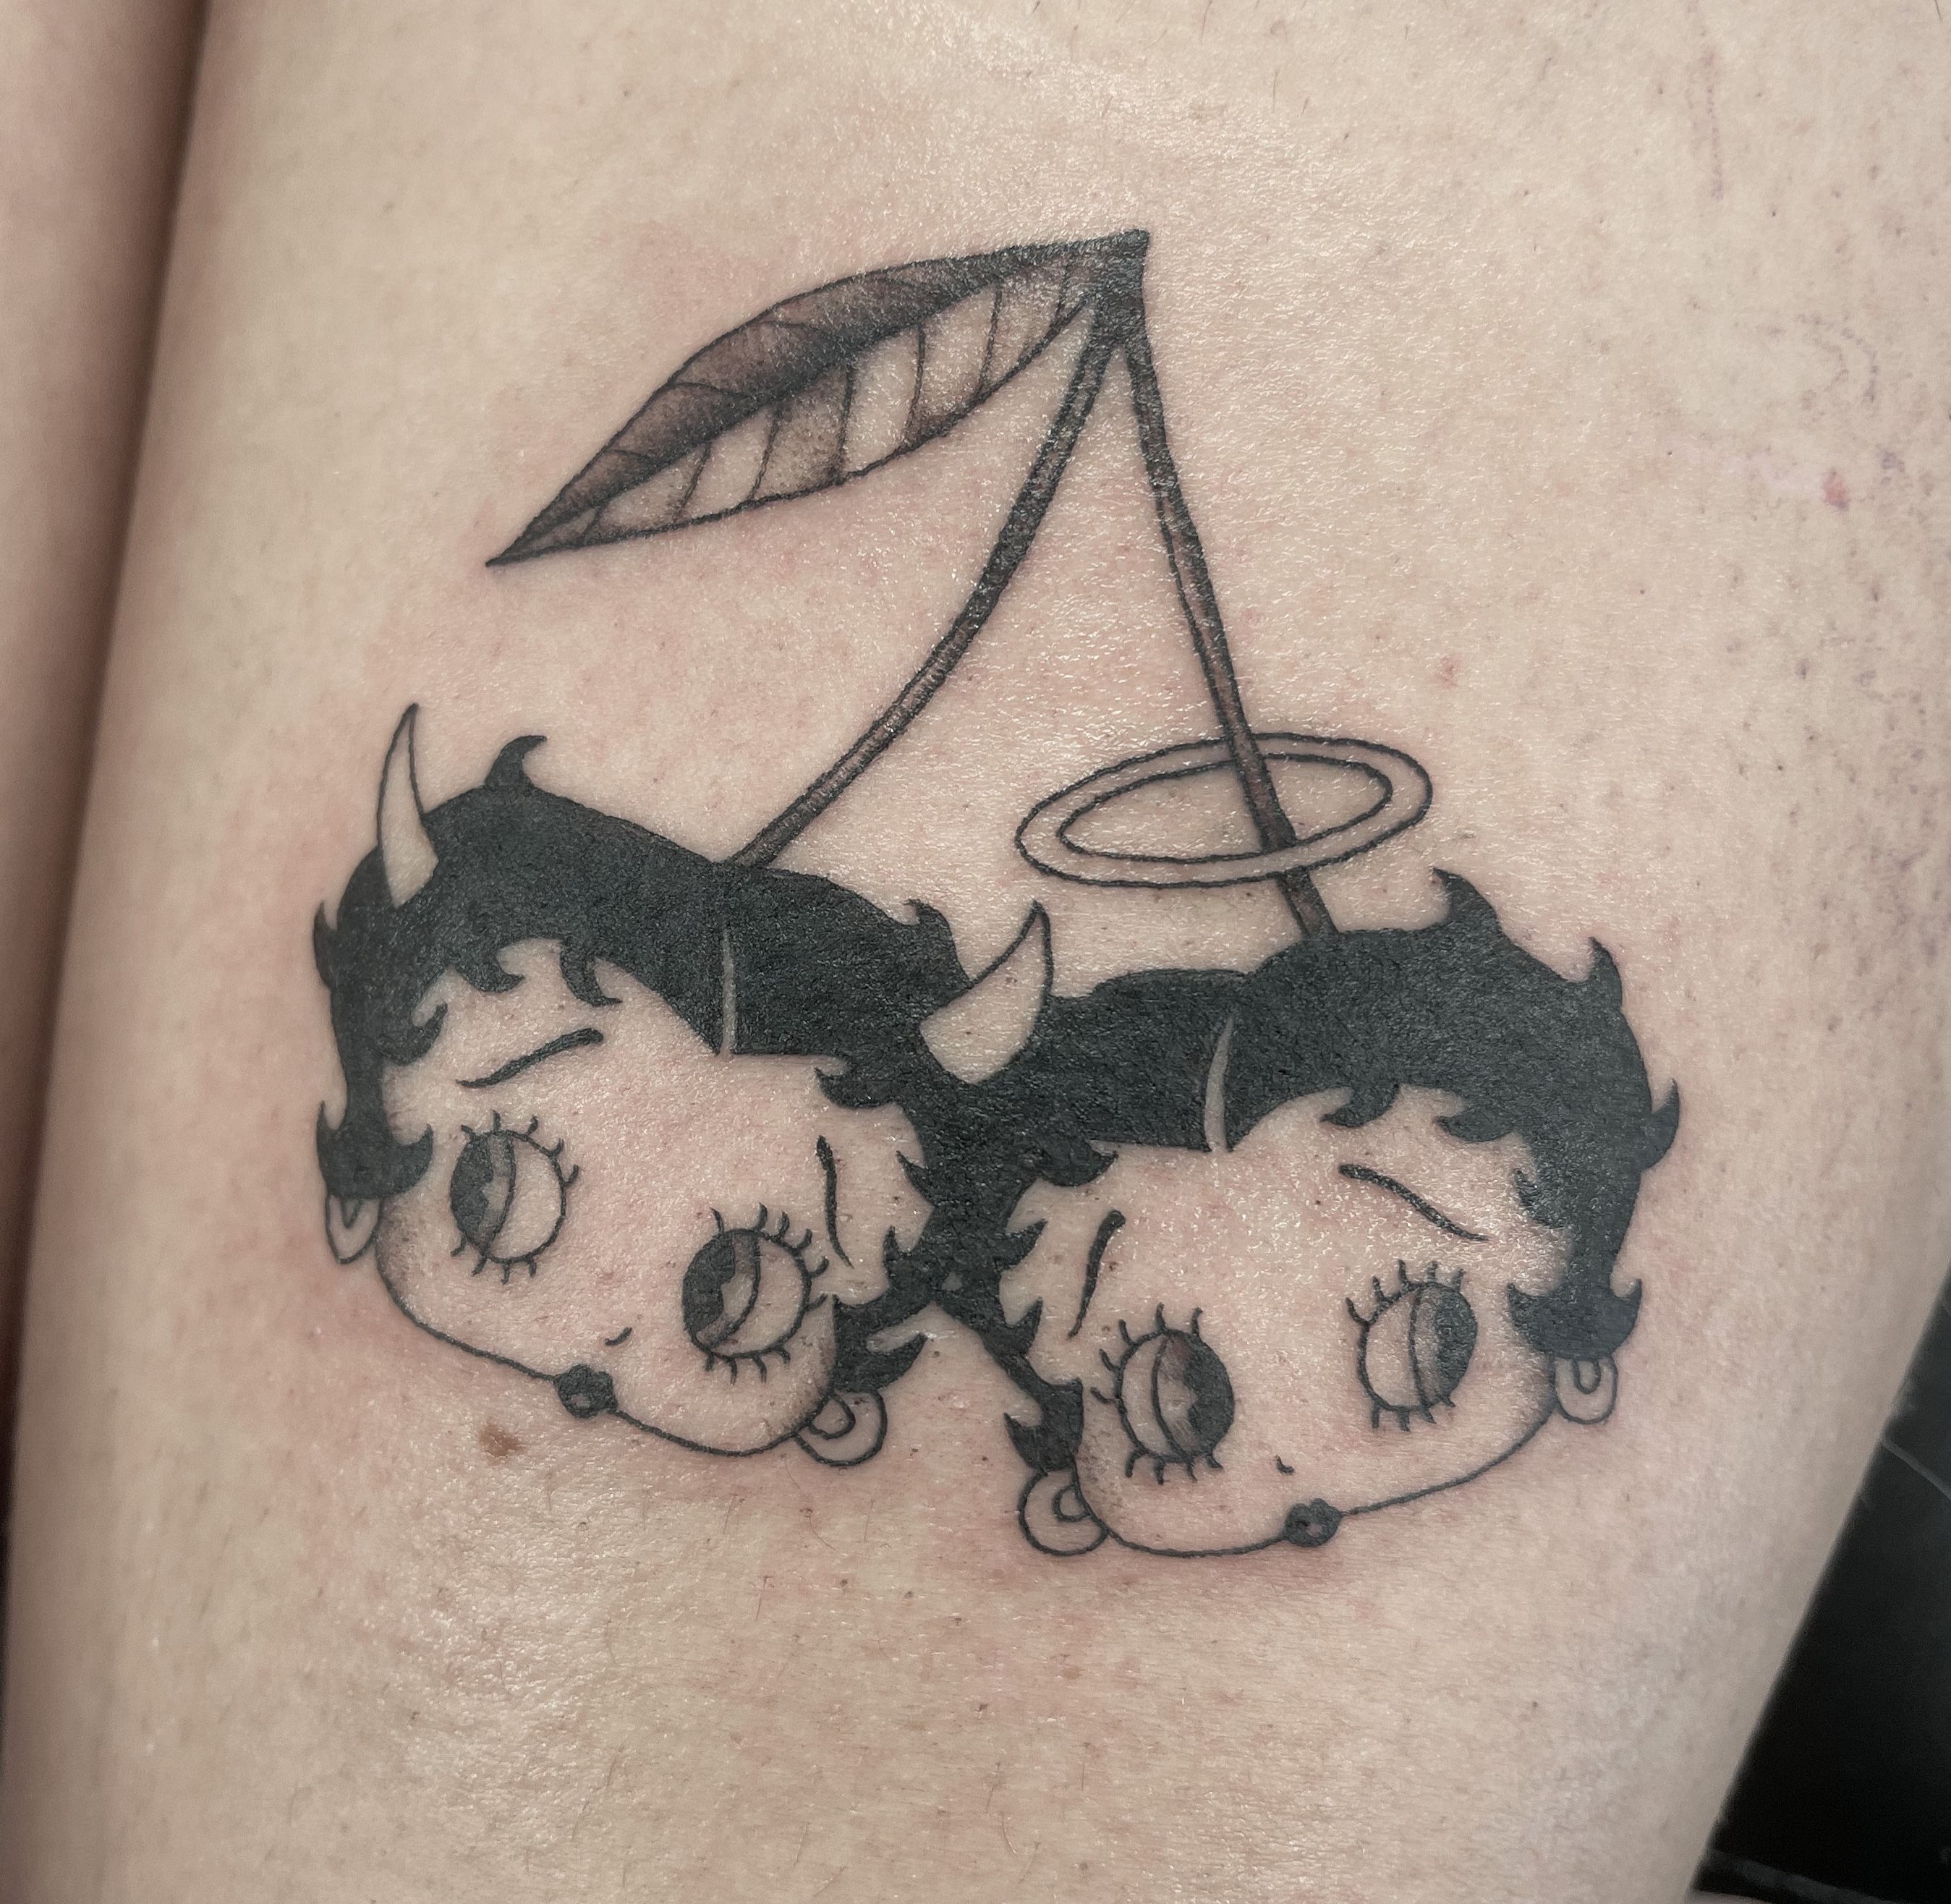 83 Betty Boop Tattoo ideas with Angel Wings Included  Tattoo Glee